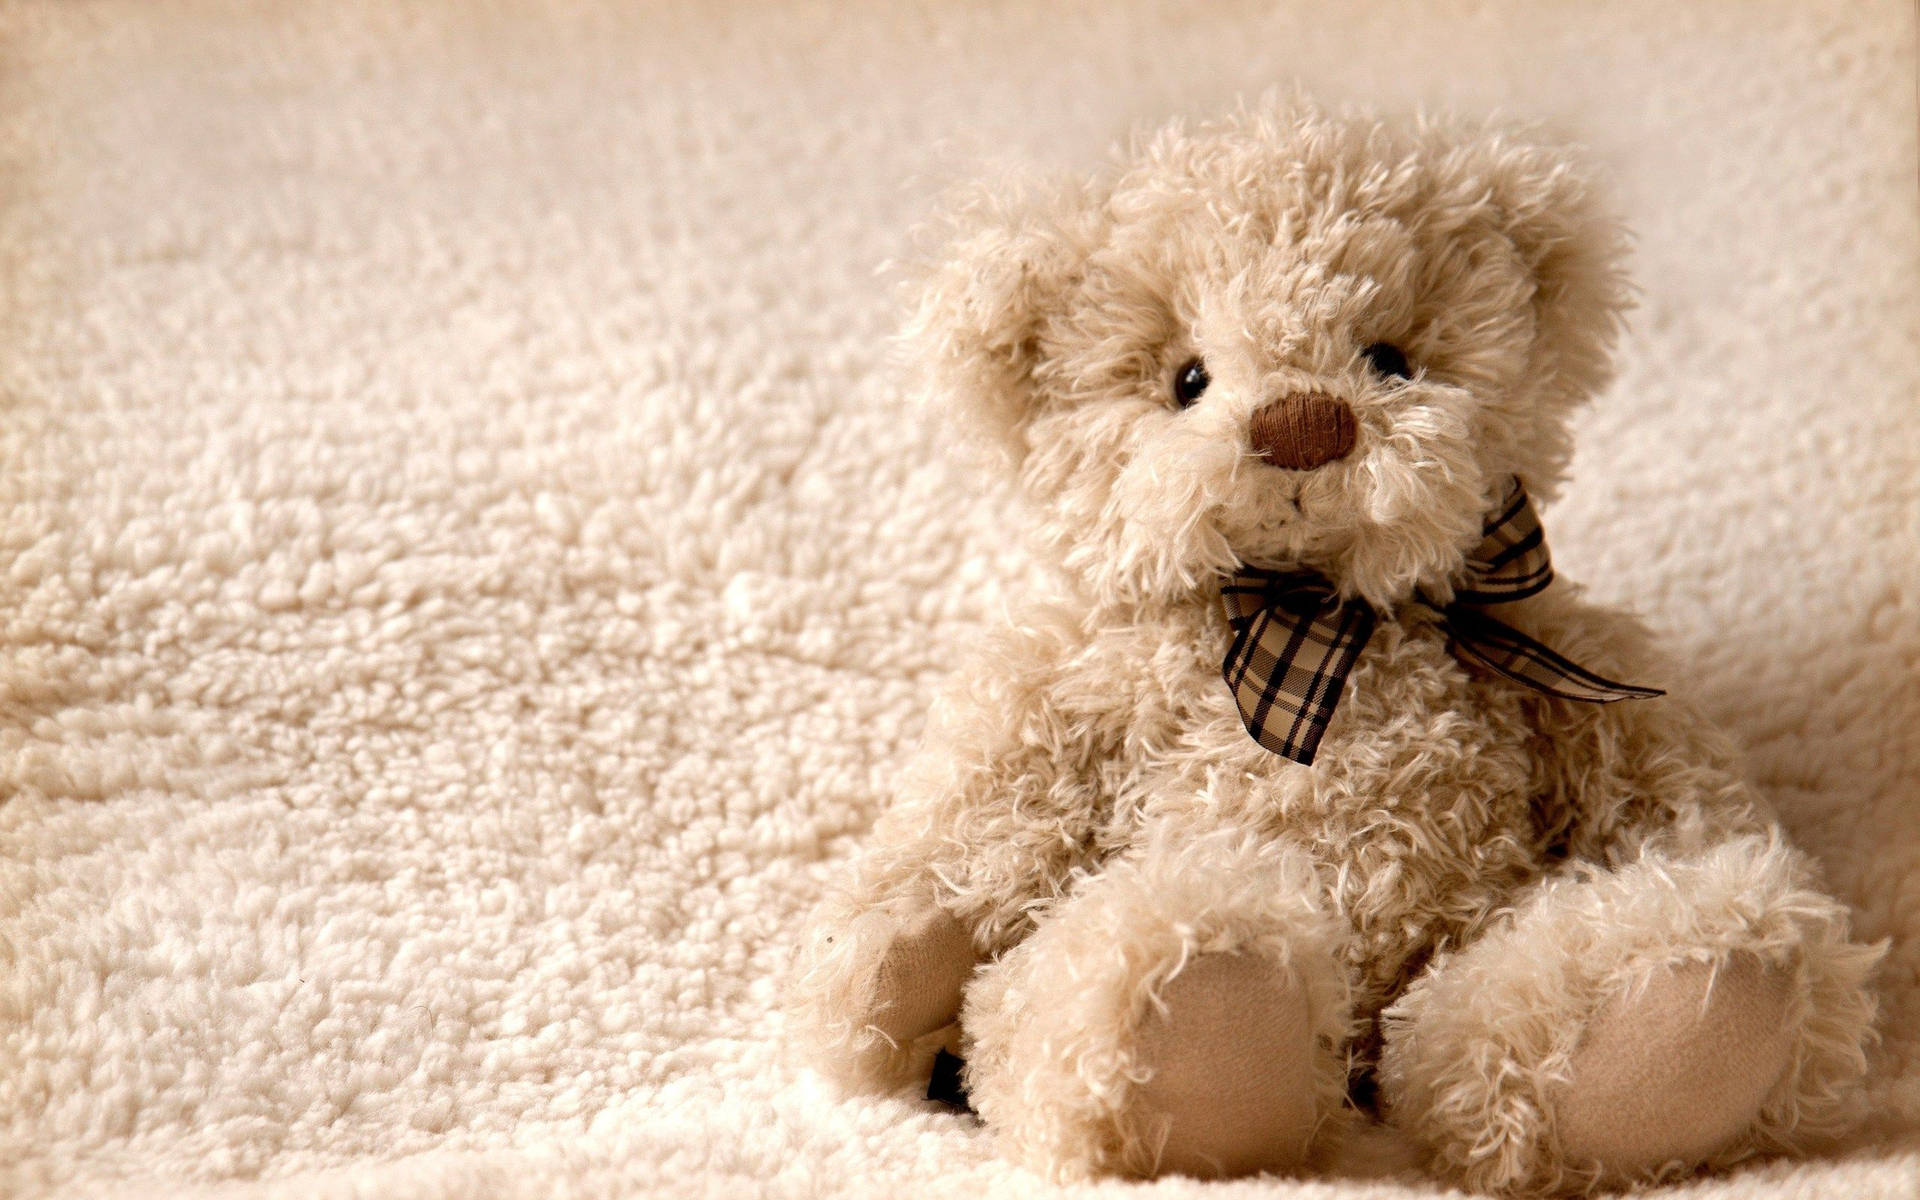 Teddy Bear HD Wallpaper, Free Teddy Bear Wallpaper Image For All Devices